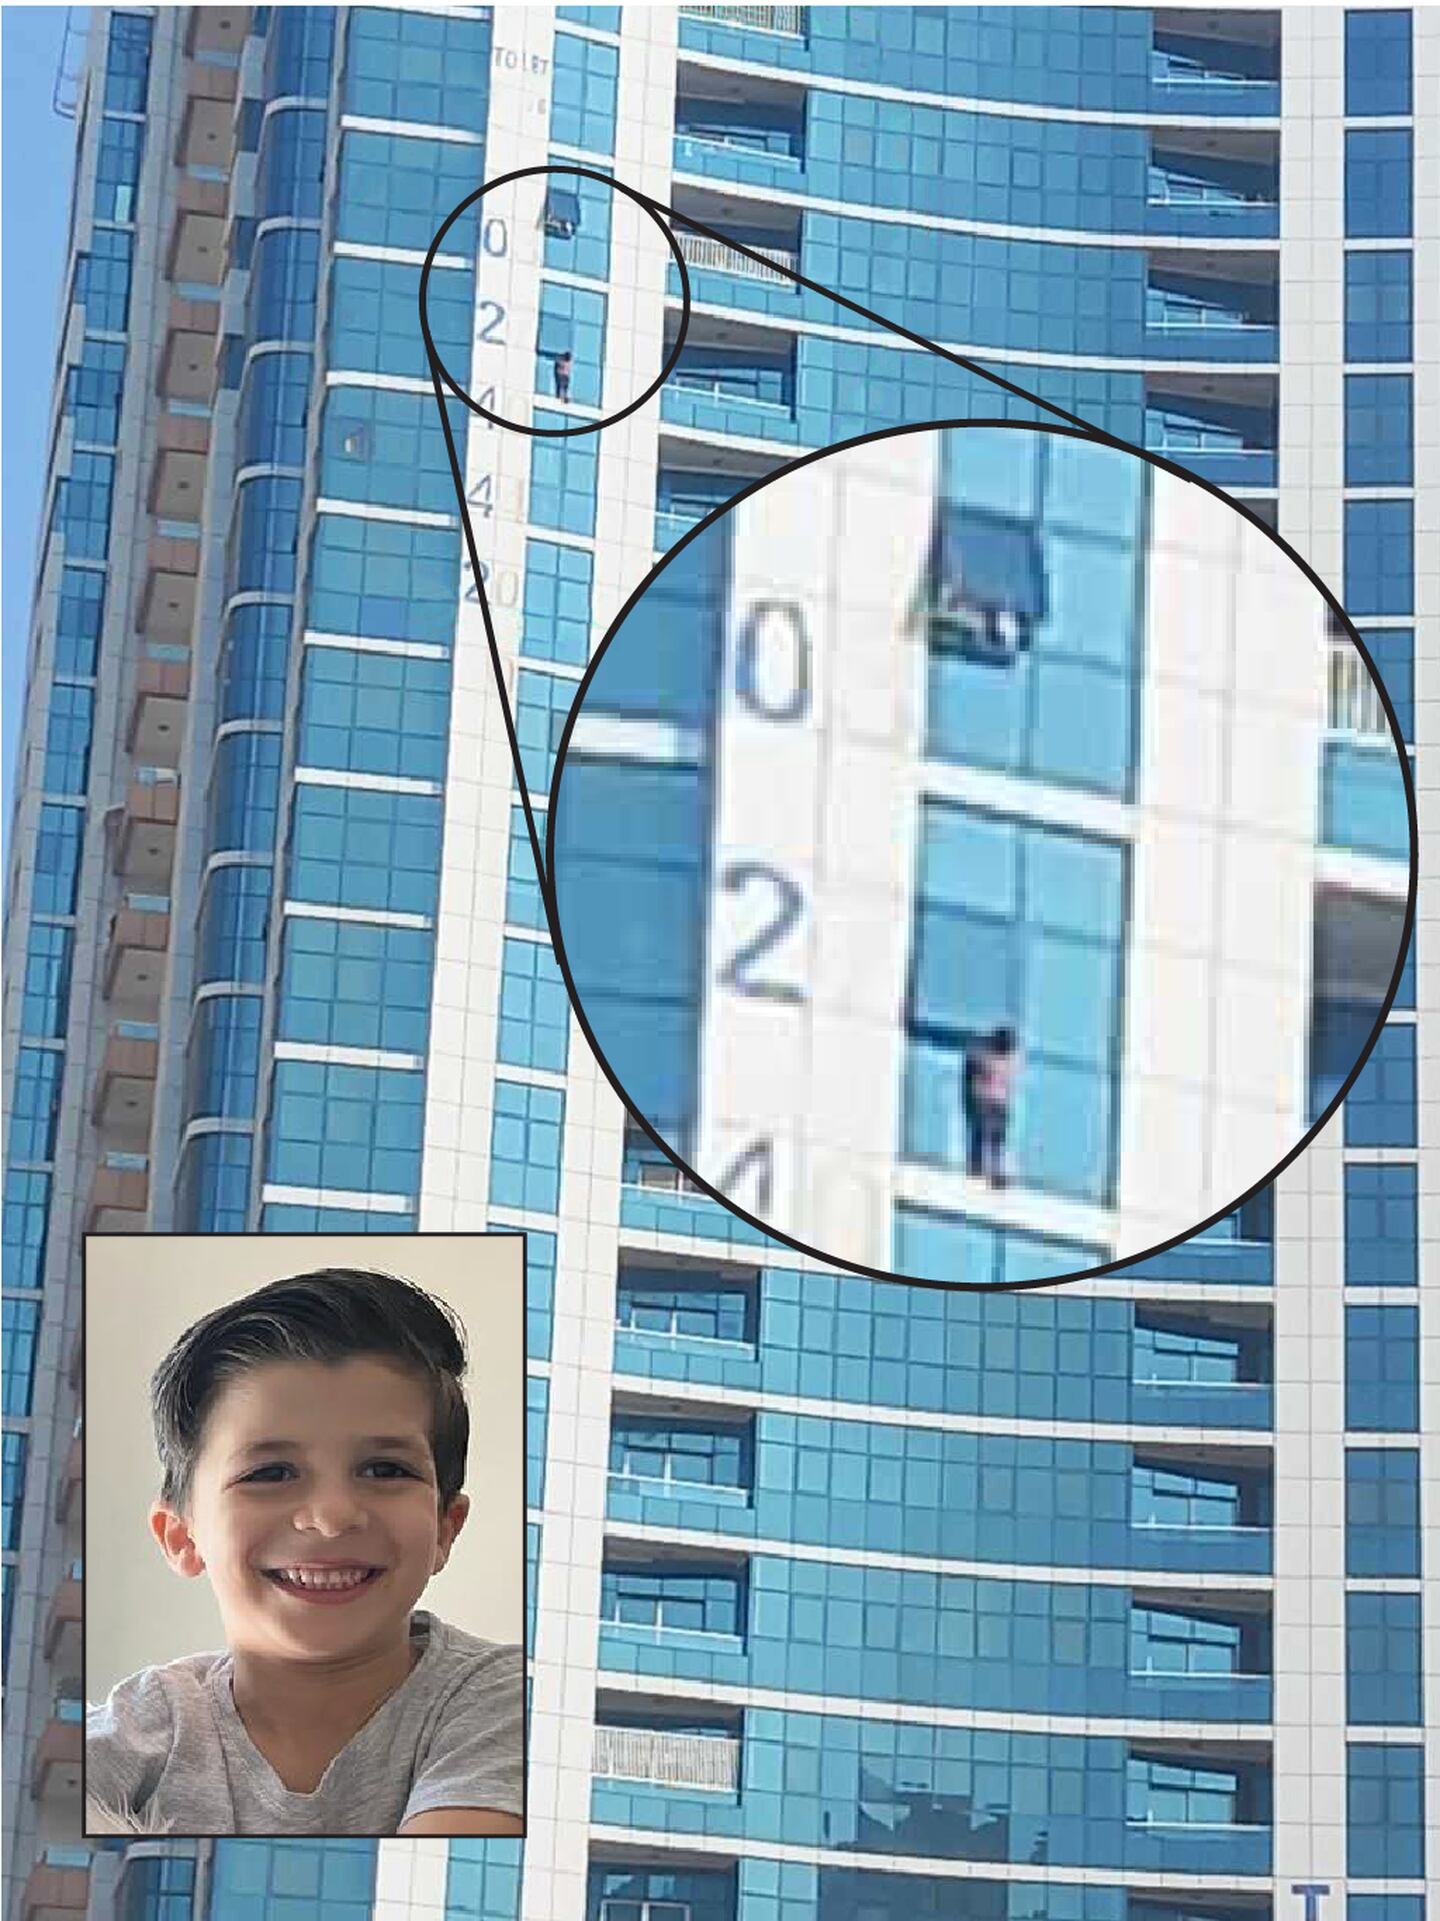 Farouq Mohammad dangling from the window of the high-rise building in Sharjah. Photo: Facebook